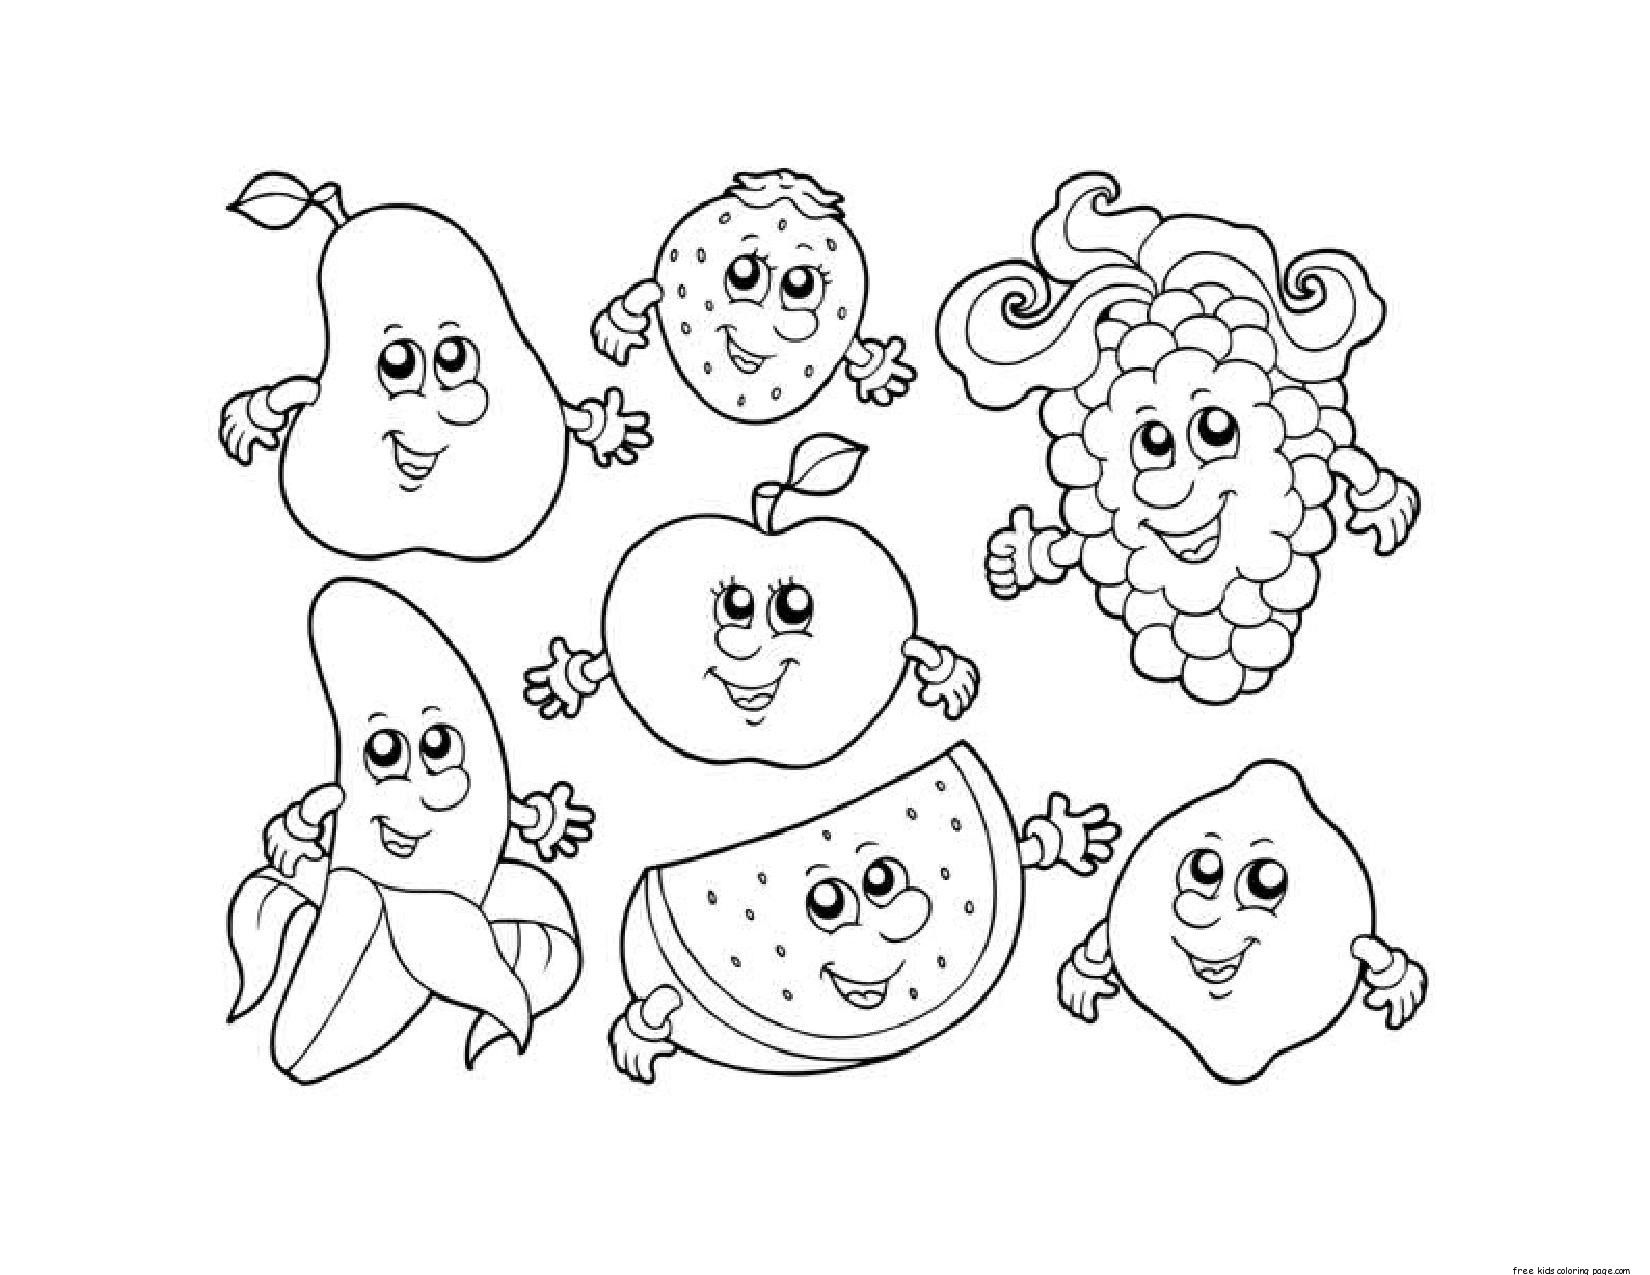 10 Pics of Grapes Fruit Coloring Pages - Grapes Clip Art Coloring ...